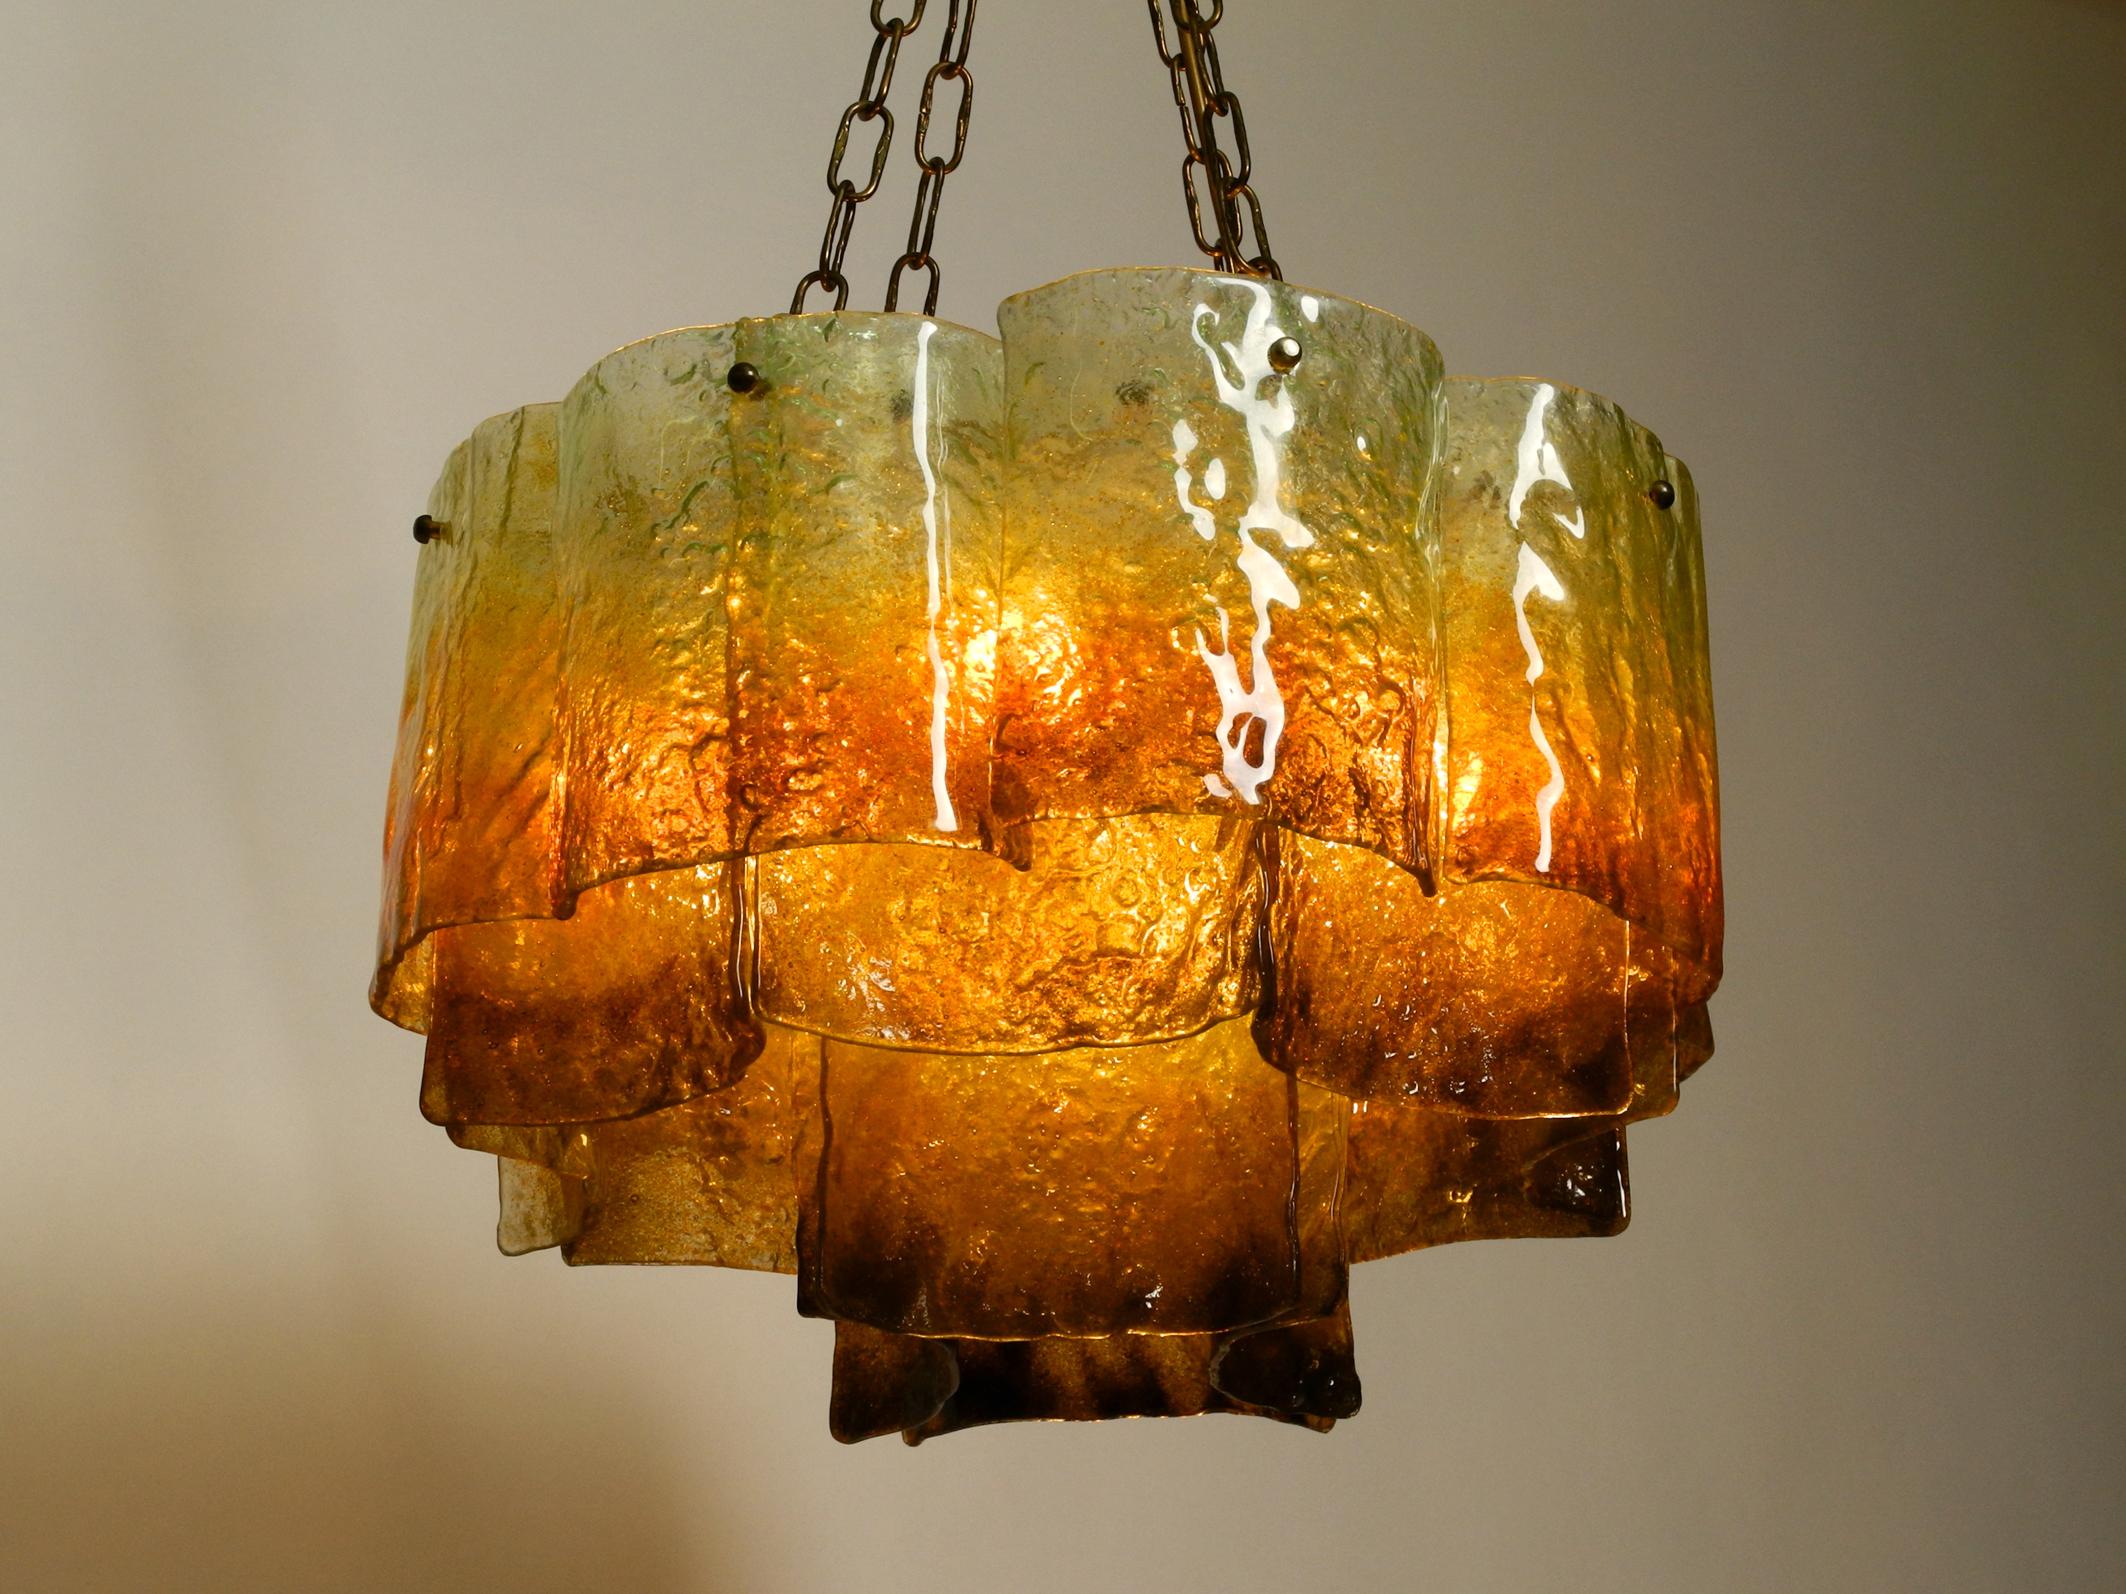 Beautiful large 1960s Italian Murano glass chandelier.
20 large curved Murano glasses color changing from red-brown to light green. 
Very high-quality stunning ceiling lamp for great, charming light in every room.
Frame and chains completely made